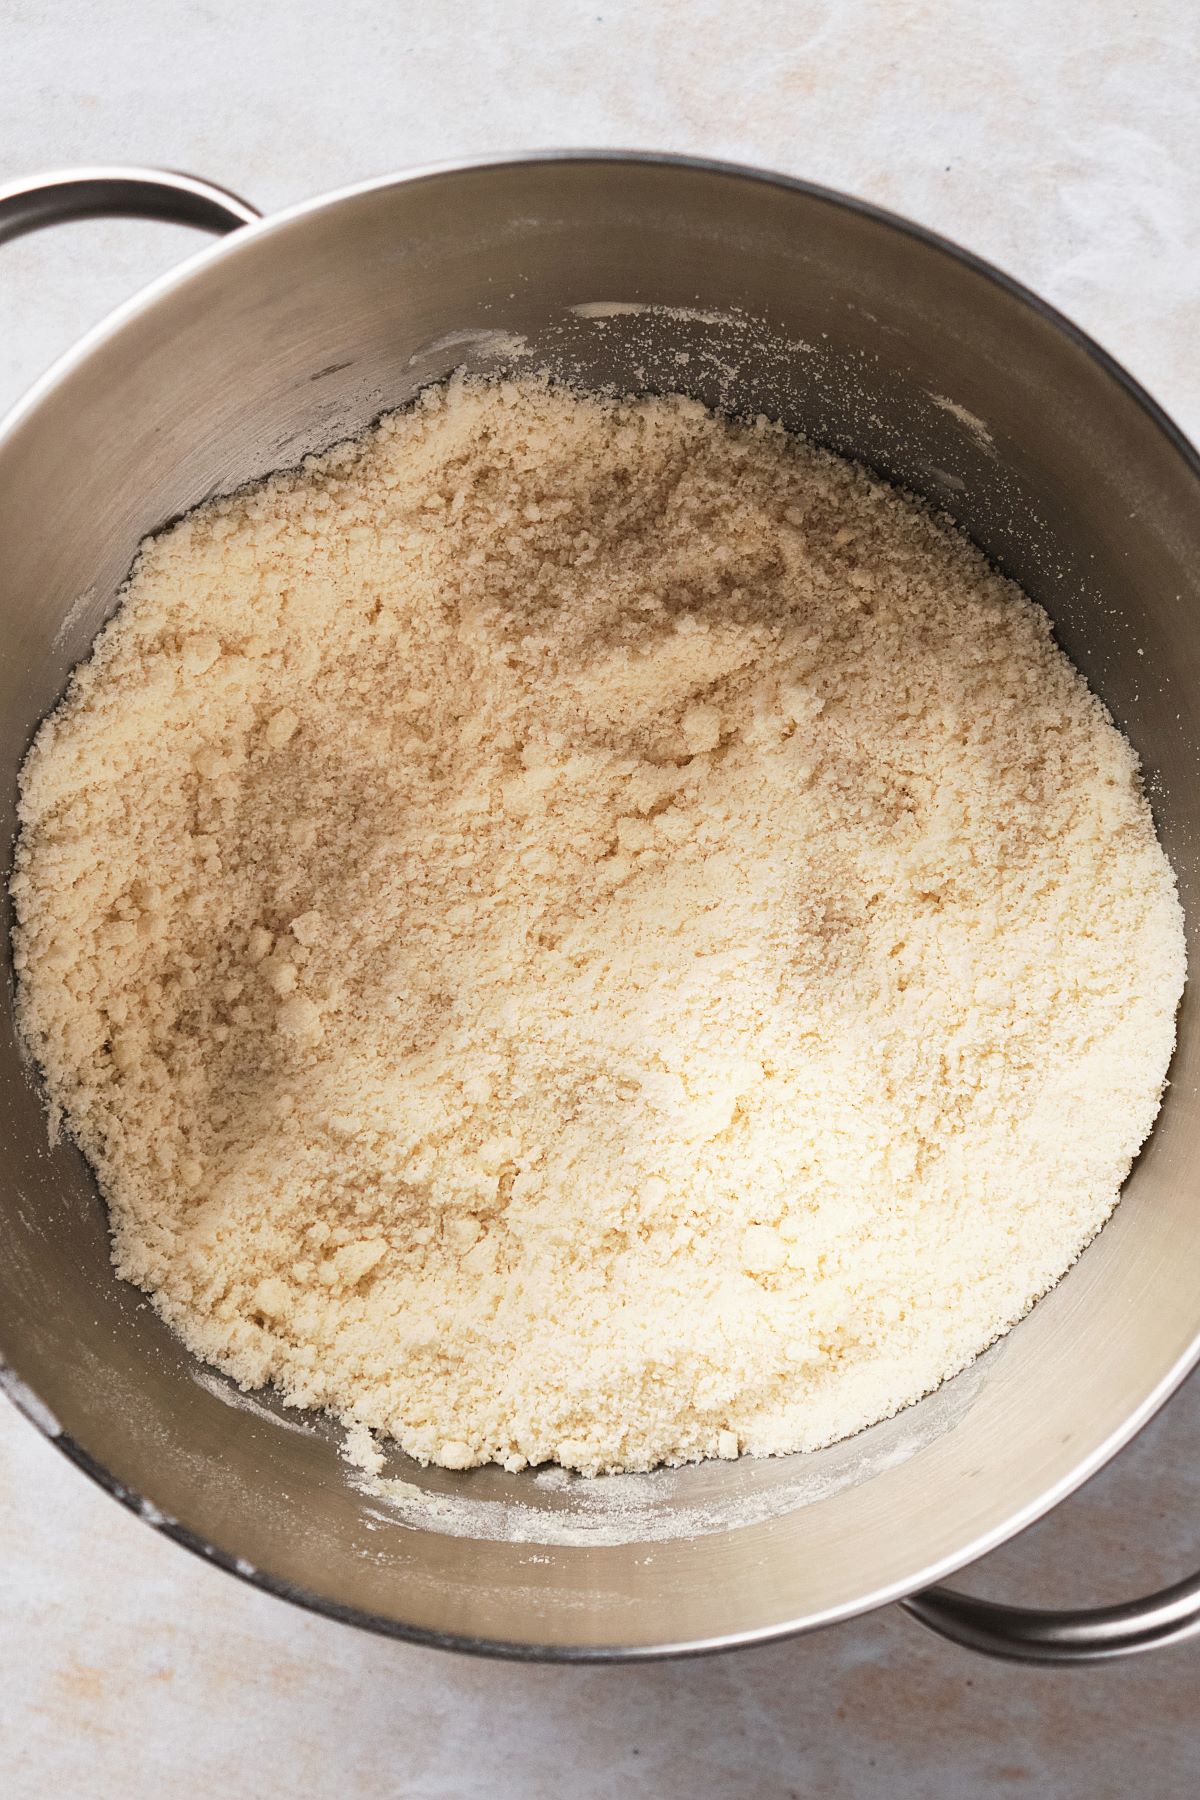 a mixture of flour and butter that resembles sand to demonstrate the reverse creaming method.